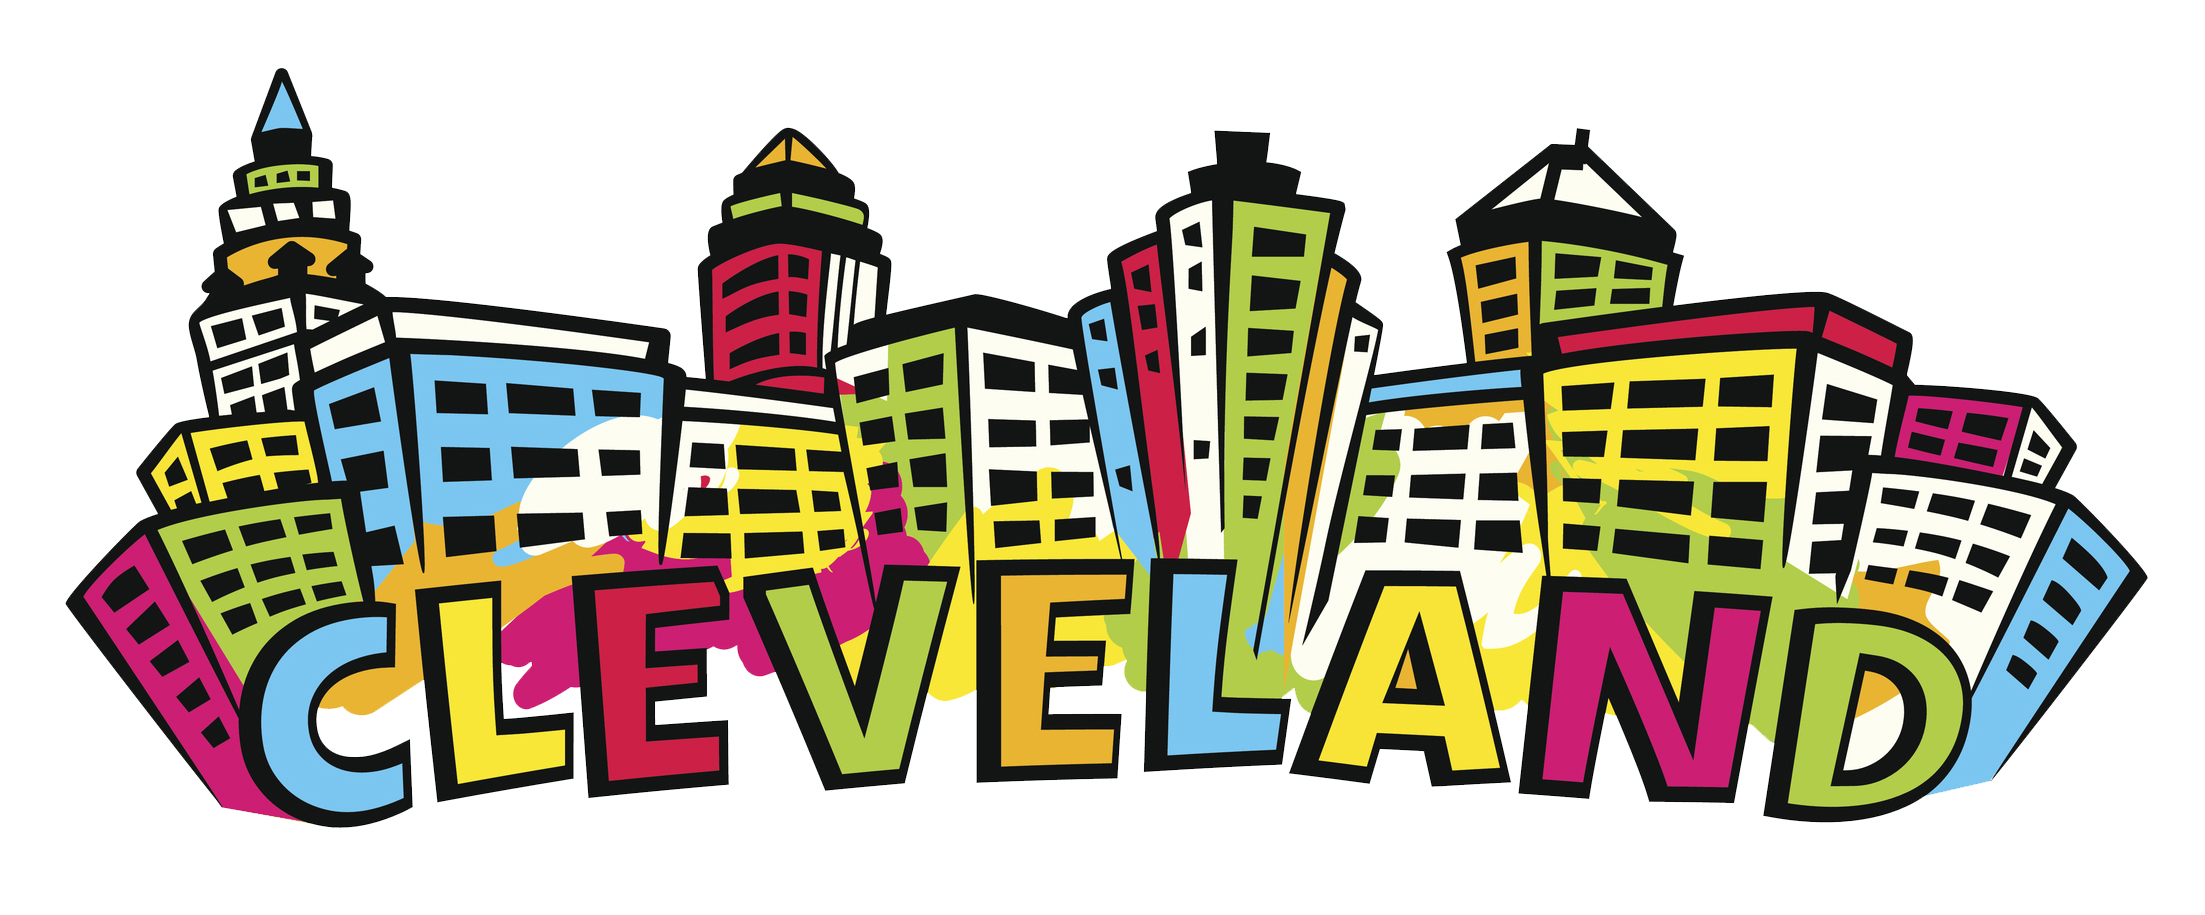 Cleveland Skyline silhouette in bright colors